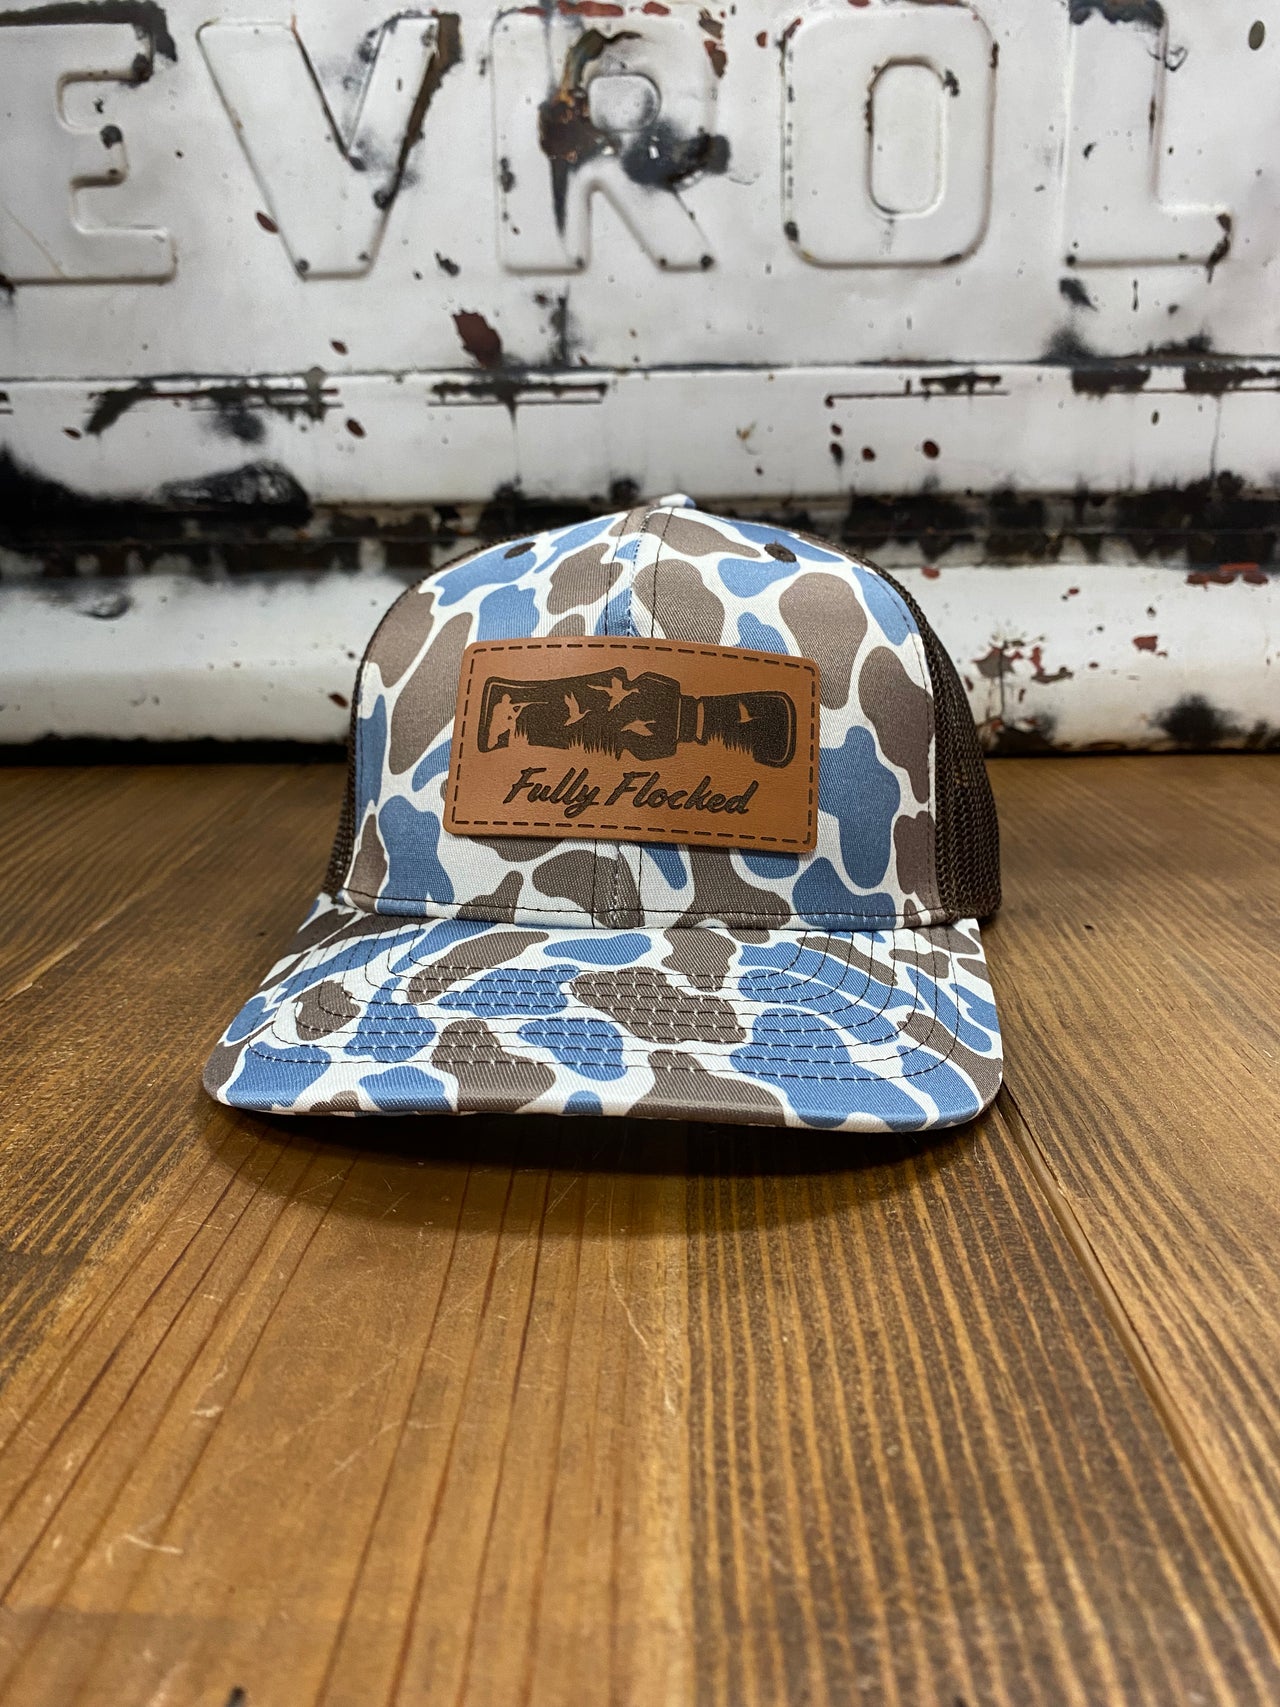 Fully Flocked Blue Old School Camo Snapback Hat featuring a richardson 112 trucker cap style, adorned with a leather patch showcasing elegant flying mallards. The blue old school camo print and brown mesh snapback create a perfect blend of classic and contemporary outdoor fashion.